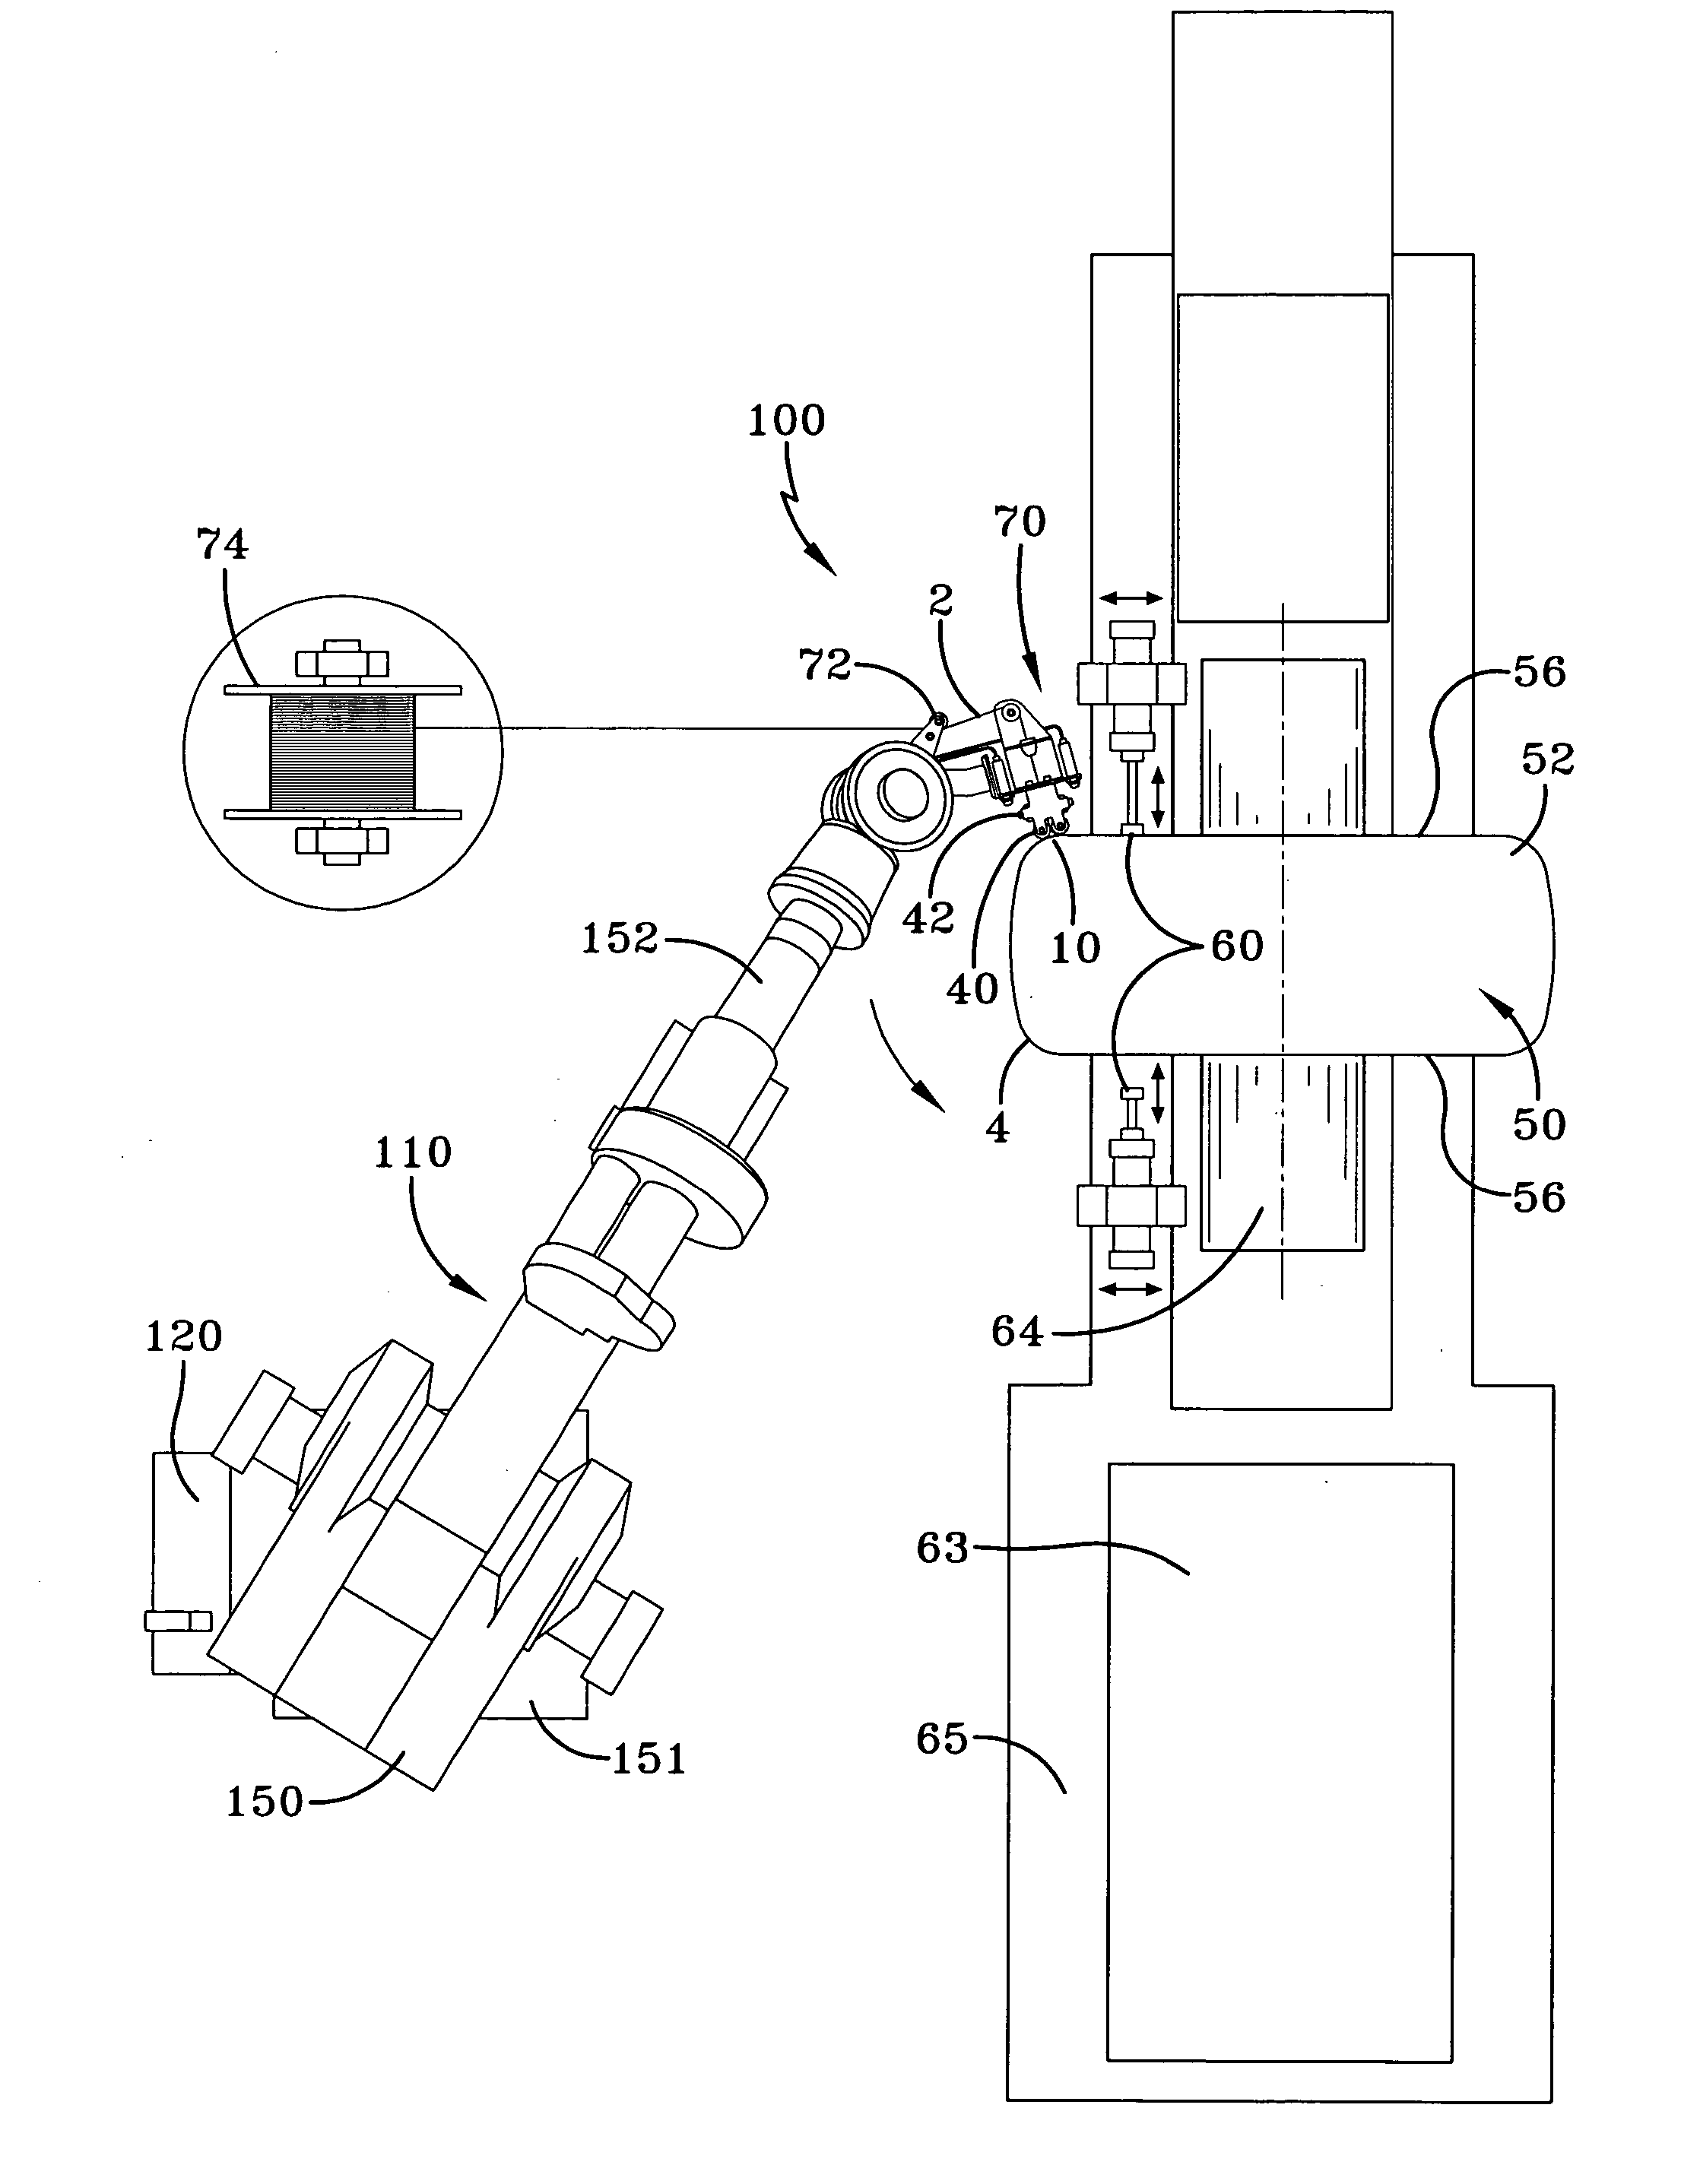 Radially expansible tire assembly drum and method for forming tires